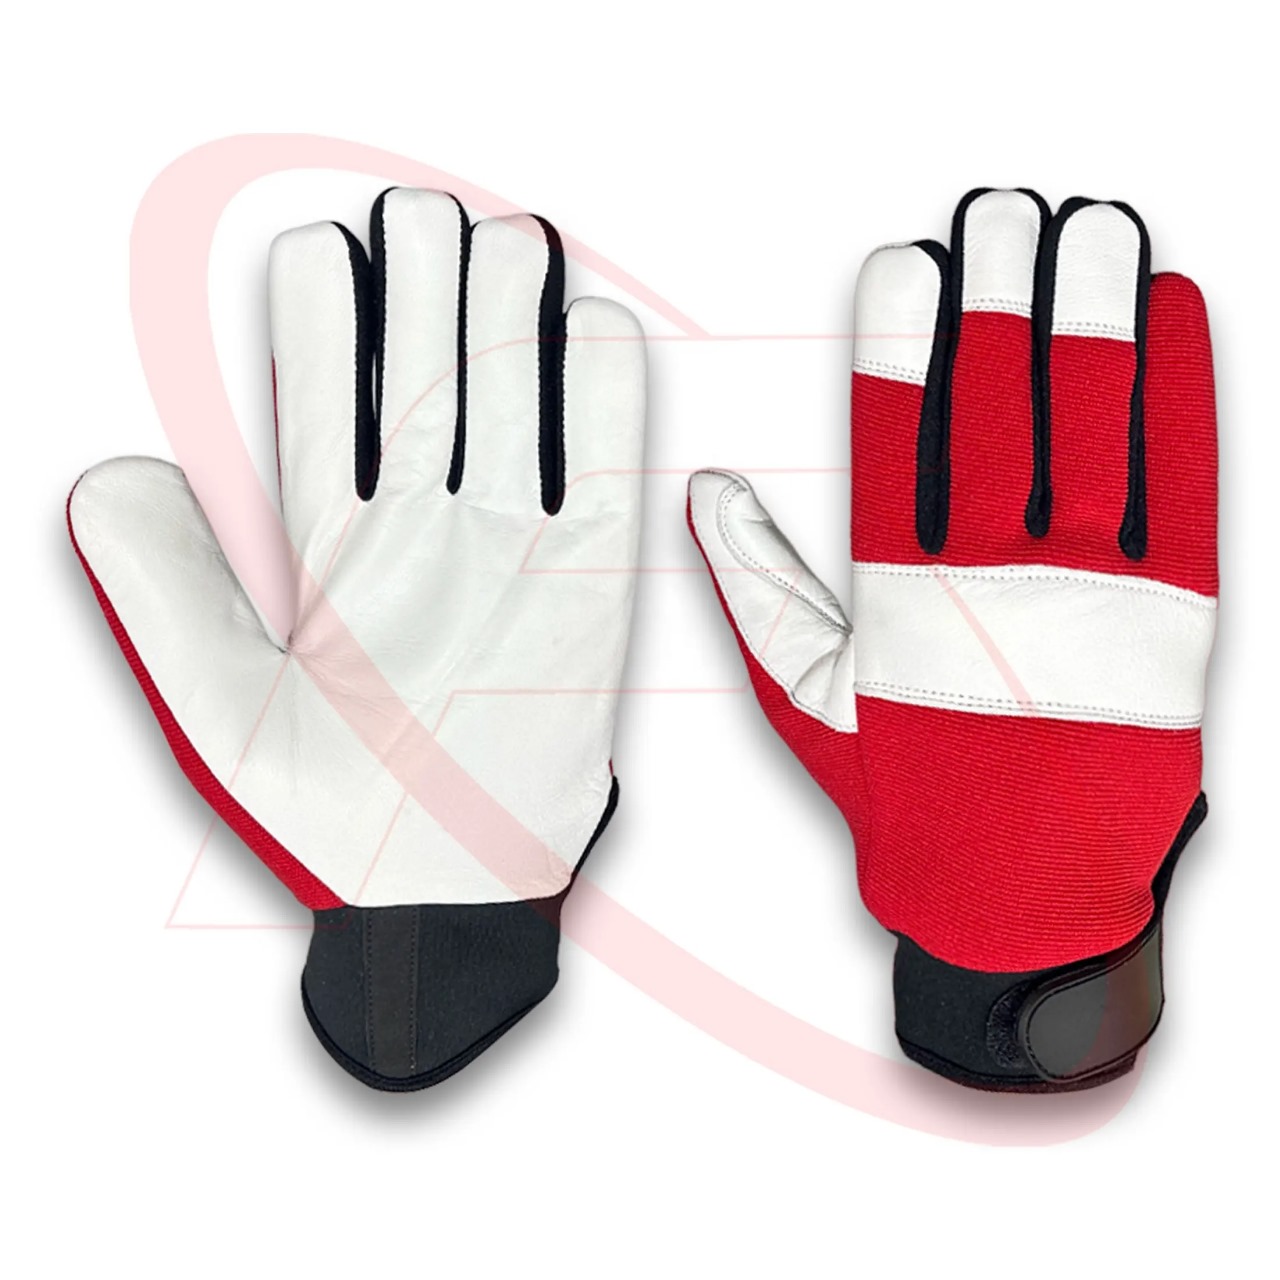 Mechanic Gloves made in Premium Goatskin Leather Work Gloves Un-Lined